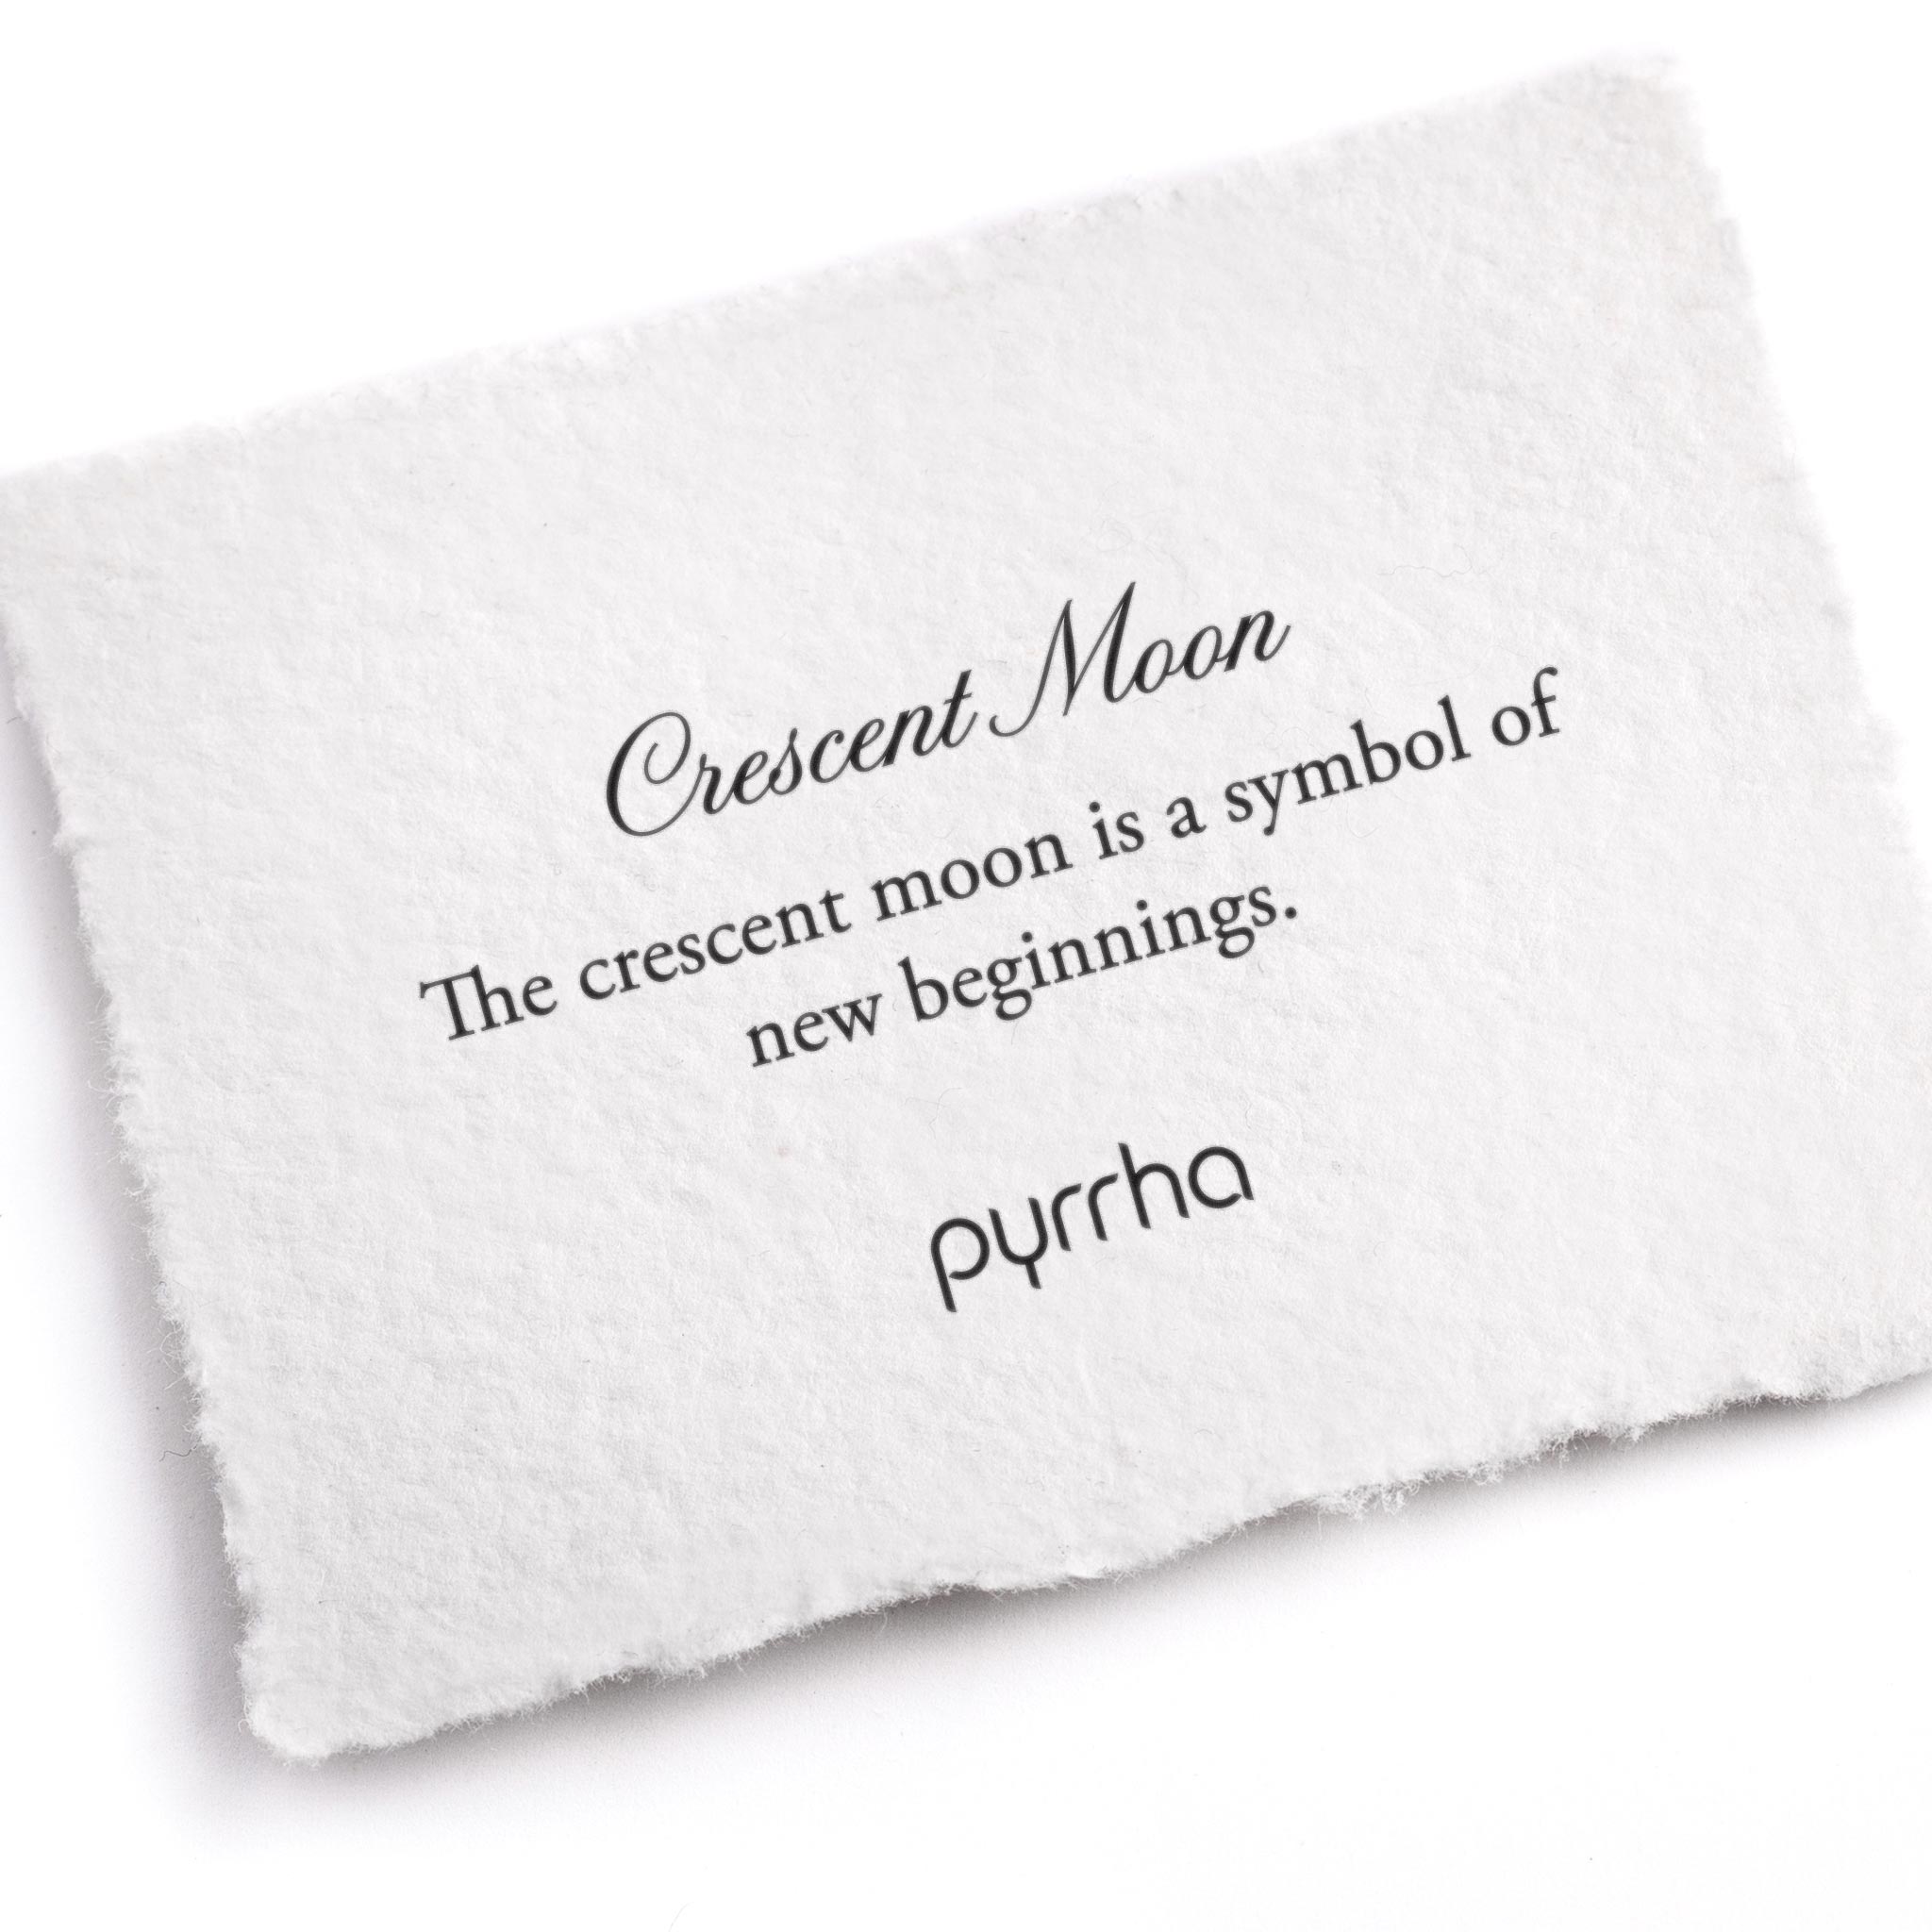 A handtorn cotton card describing the meaning for our Crescent Moon 14K Gold Symbol Charm Bracelet.